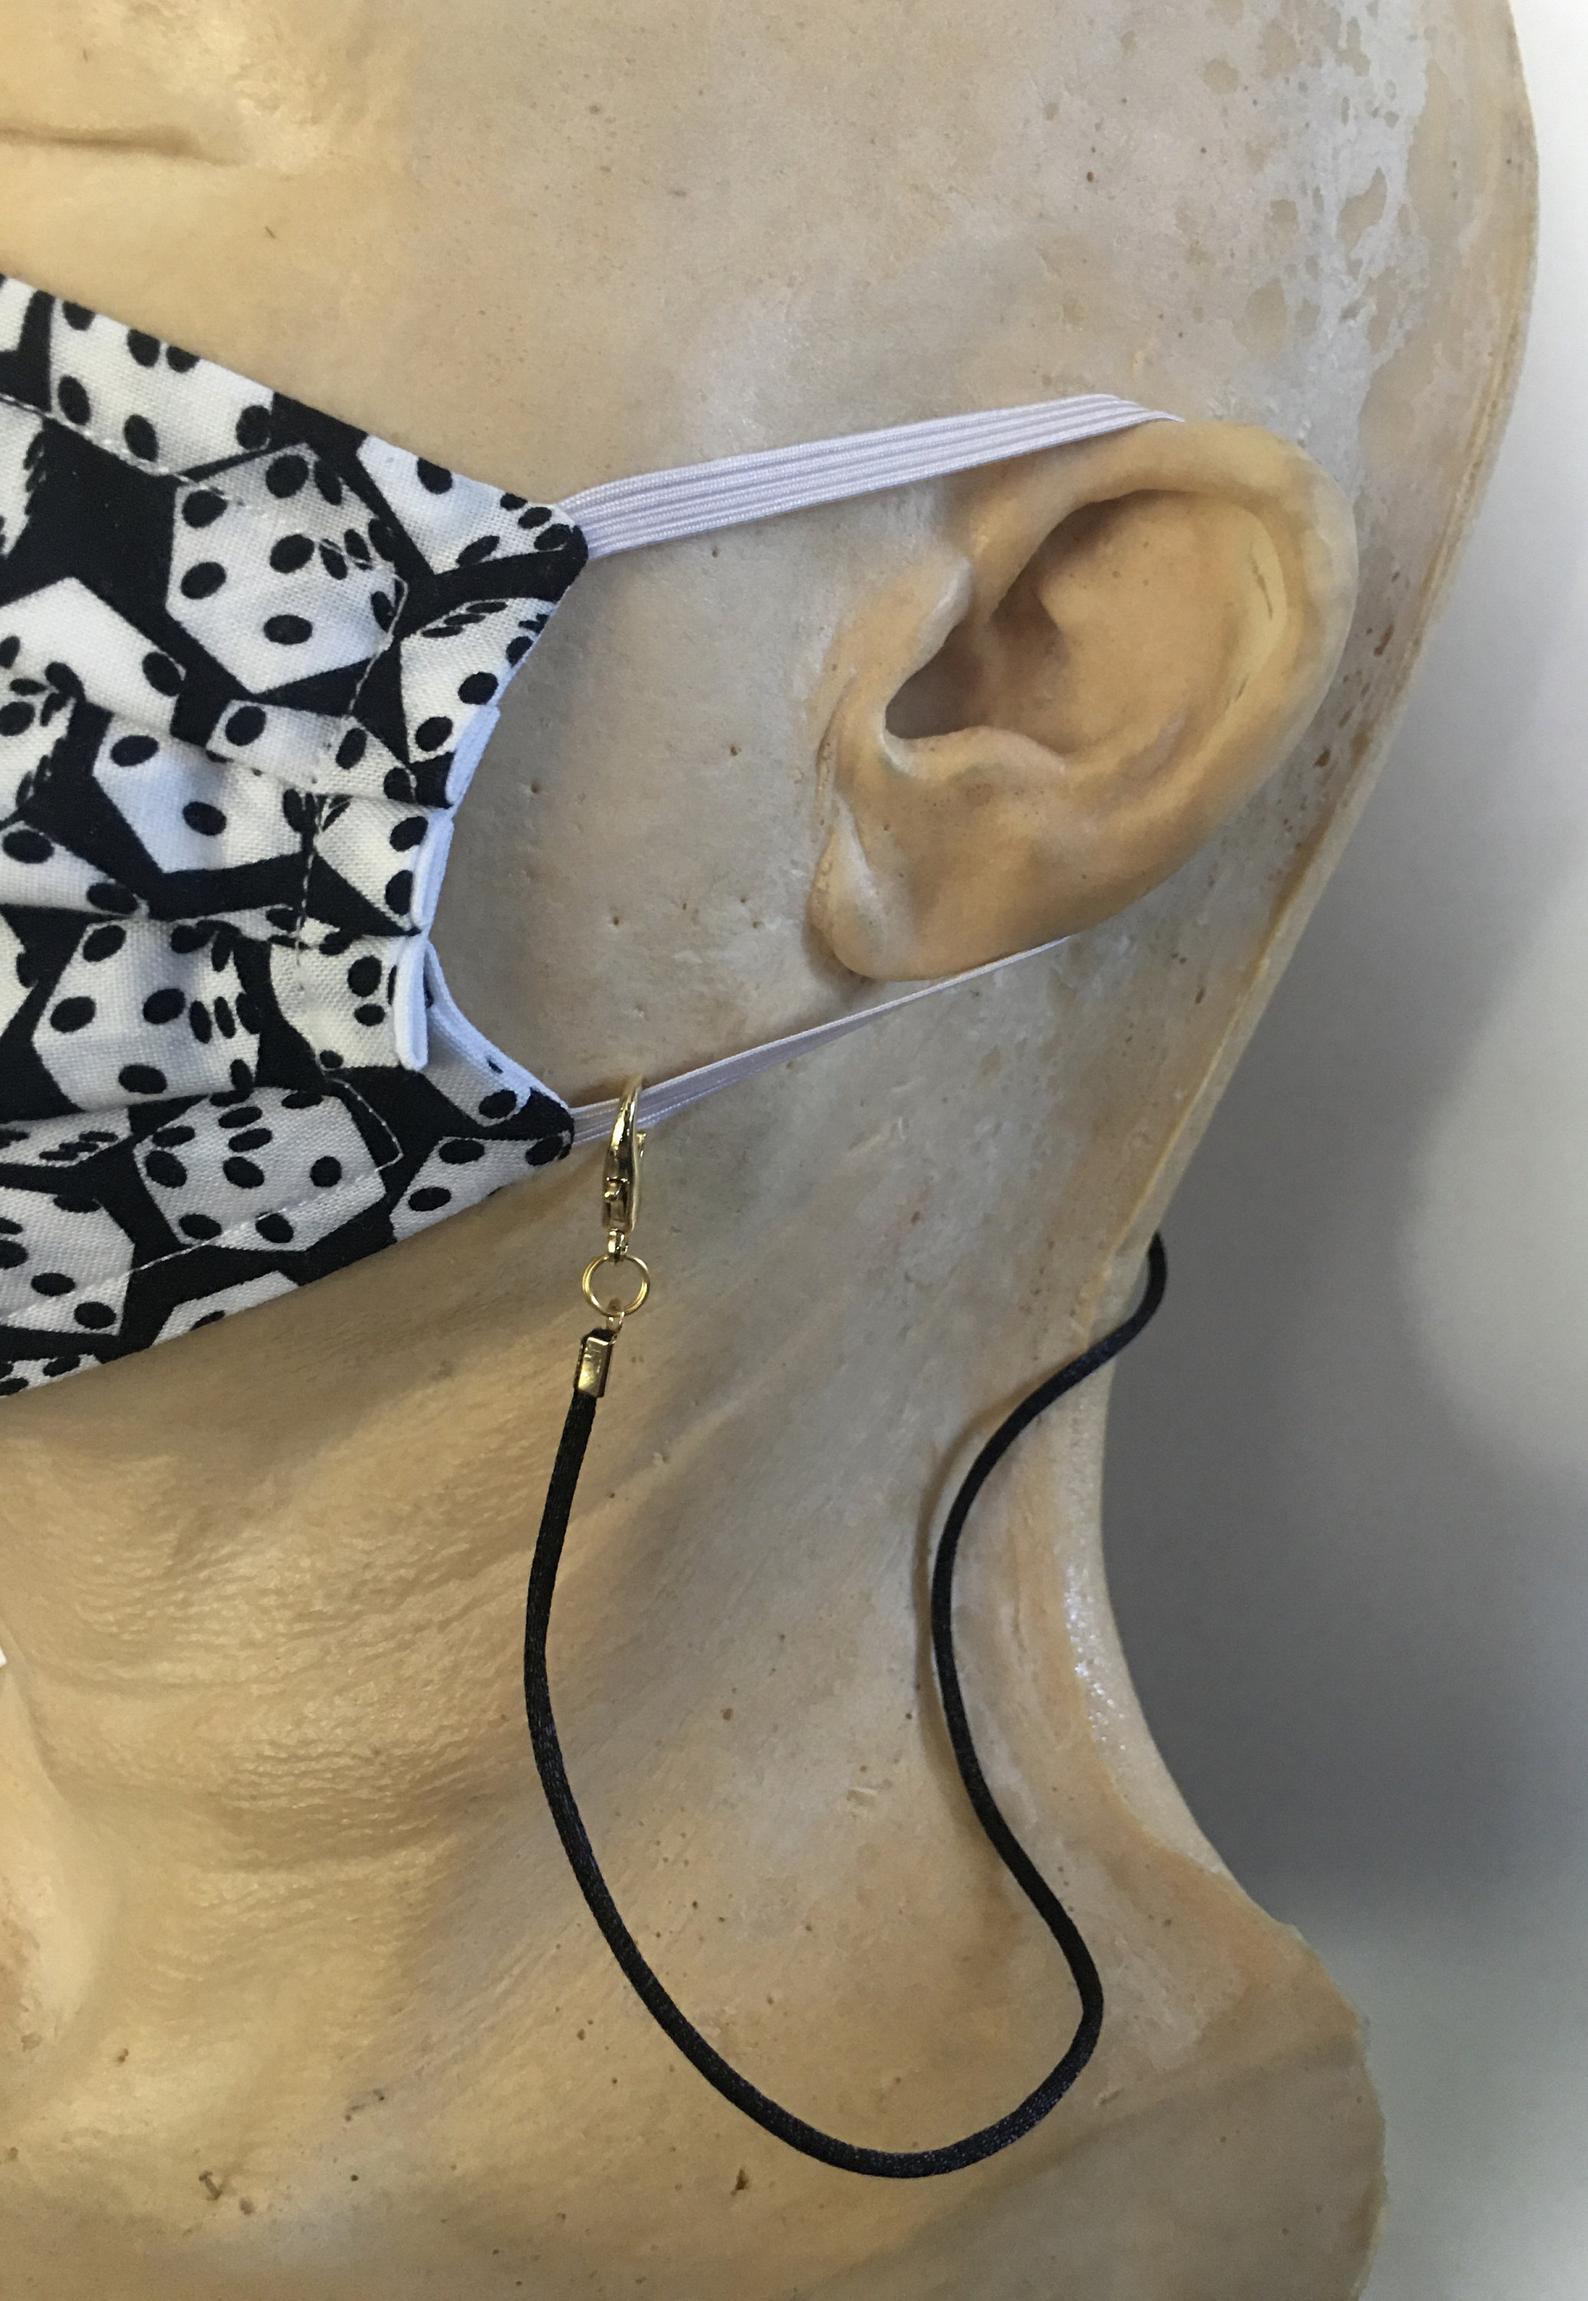 4 fun mask accessories to make wearing a mask a little easier: This mask cord from Kimsters Kreations is a lifesaver. 